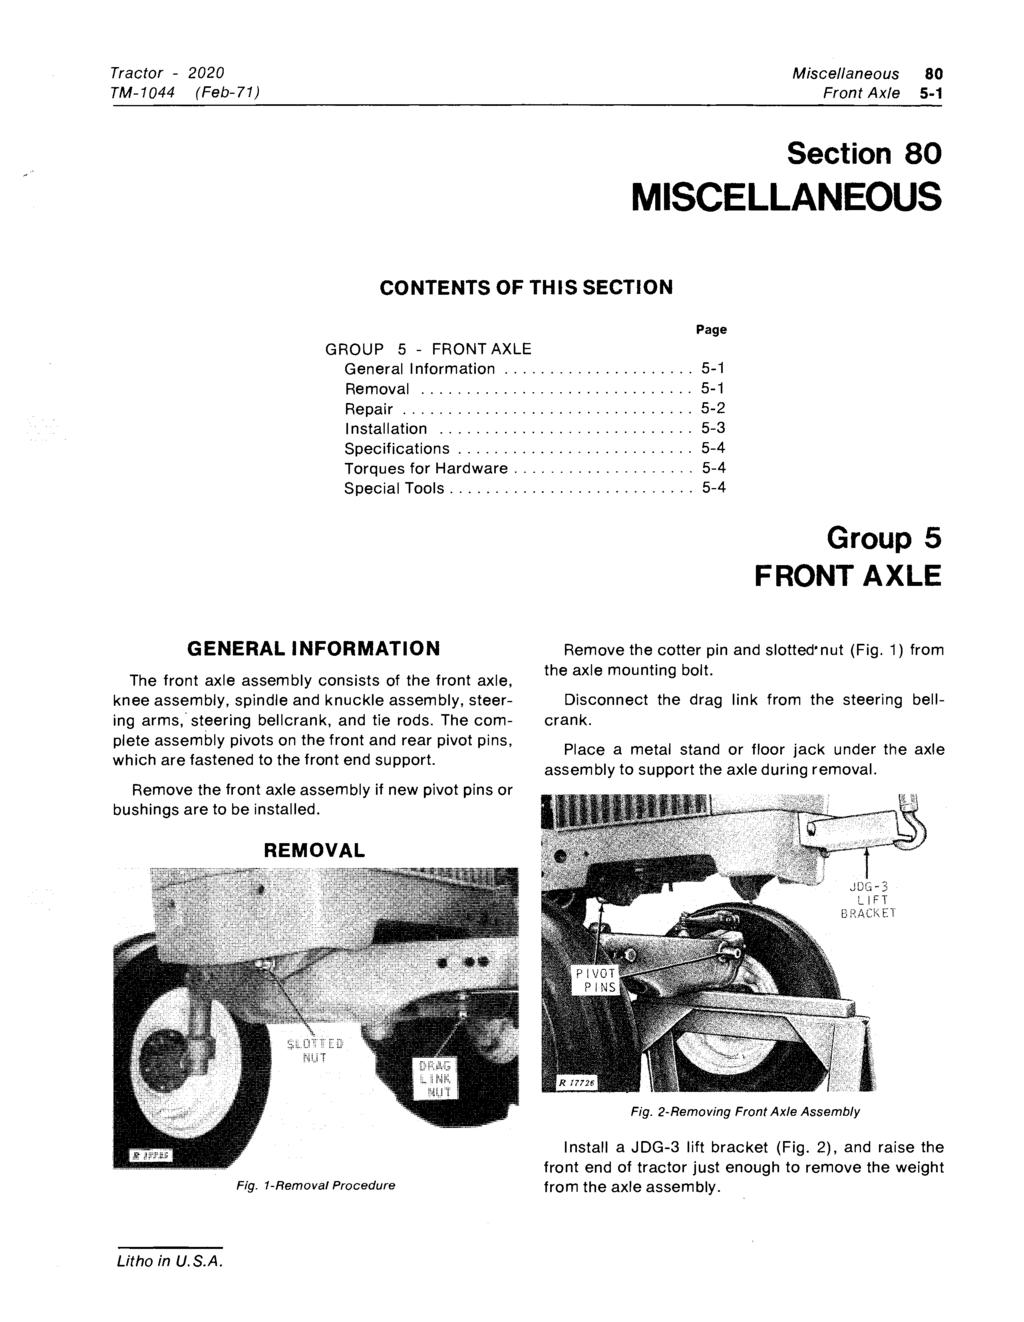 TM-1044 (Feb-71) Miscellaneous 80 Front Axle 5-1 Section 80 MISCELLANEOUS GROUP 5 - FRONT AXLE General Information... 5-1 Removal... 5-1 Repair... 5-2 Installation... 5-3 Specifications.